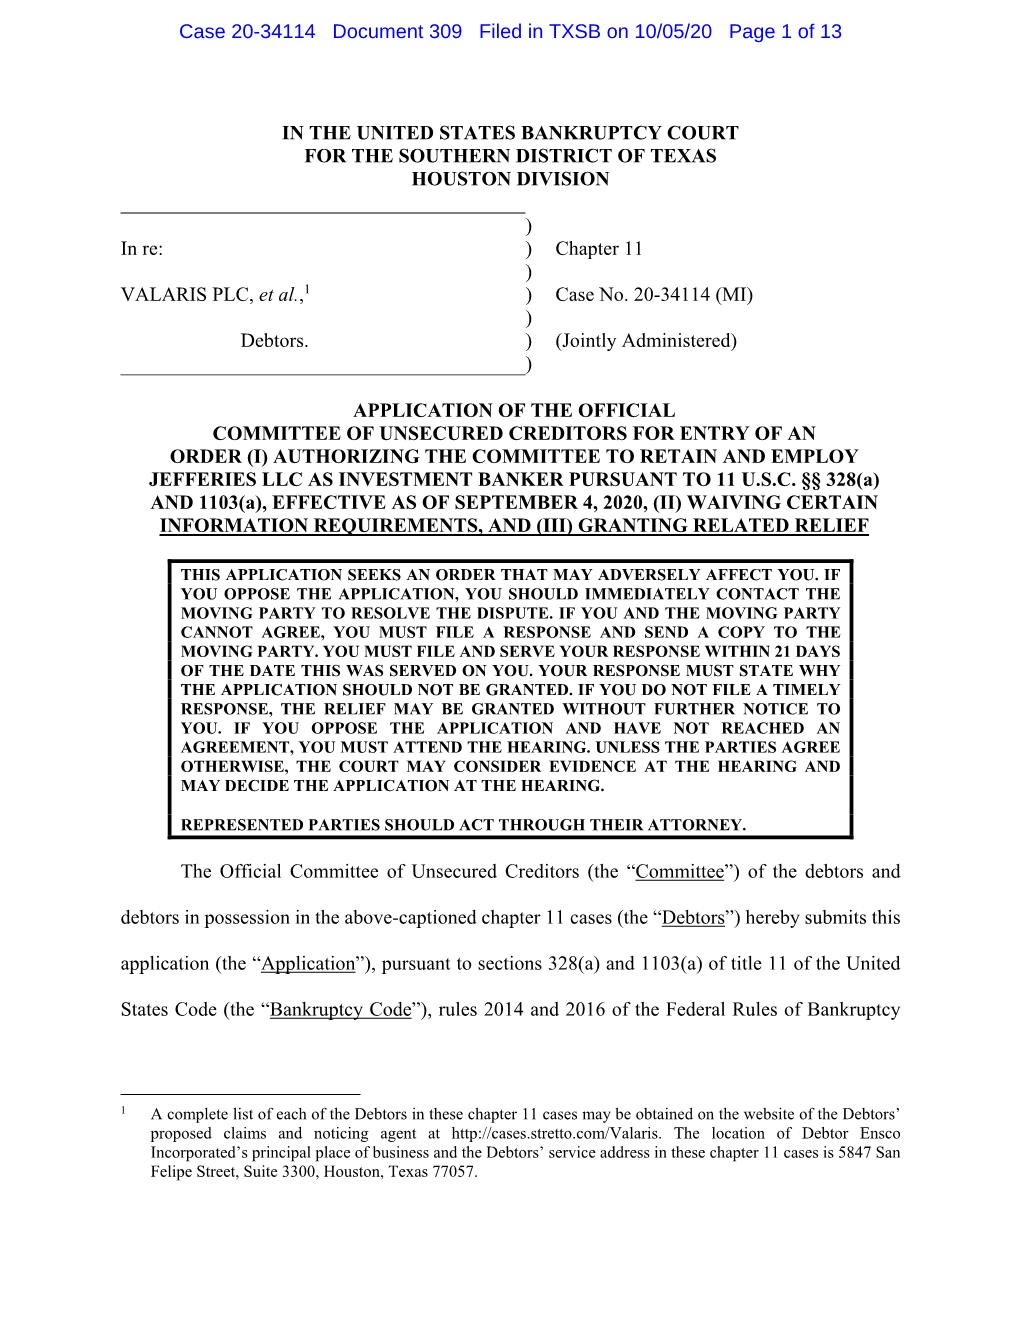 Case 20-34114 Document 309 Filed in TXSB on 10/05/20 Page 1 of 13